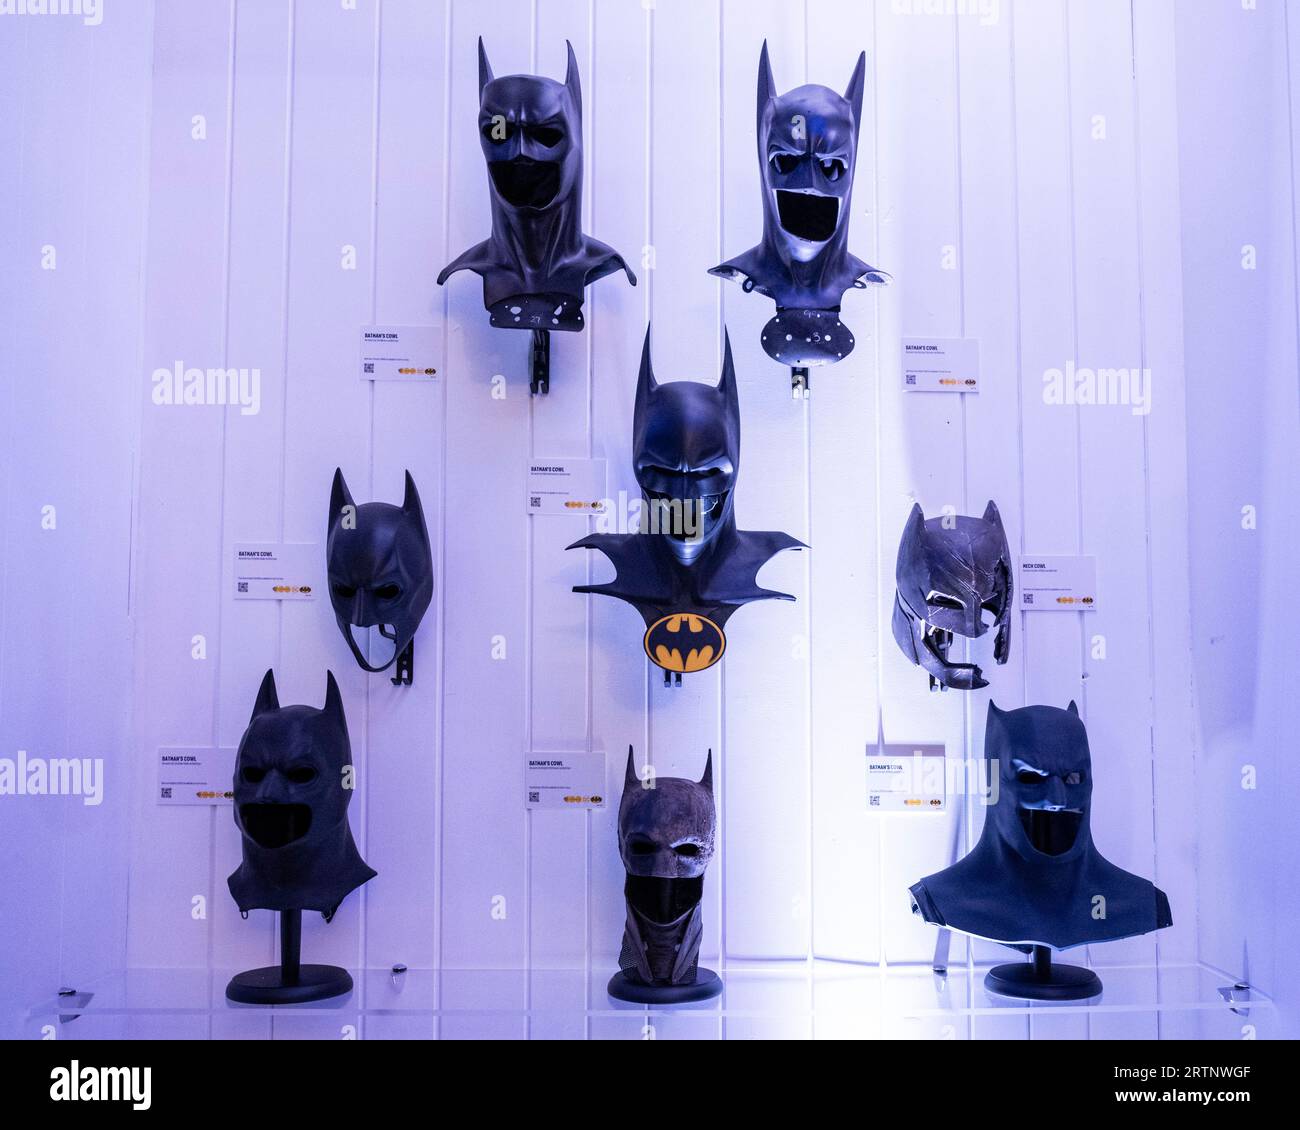 London, UK.  14 September 2023. Original Batcowls worn in different Batman movies at the preview of Batman Unmasked at 180 Piccadilly.  Marking global Batman Day, The Caped Crusader’s legendary history is celebrated through rare comics from Batman’s beginnings, to his appearance in TV, movies, videogames and more.  The show is open to the public 15 to 17 September.  Credit: Stephen Chung / Alamy Live News Stock Photo